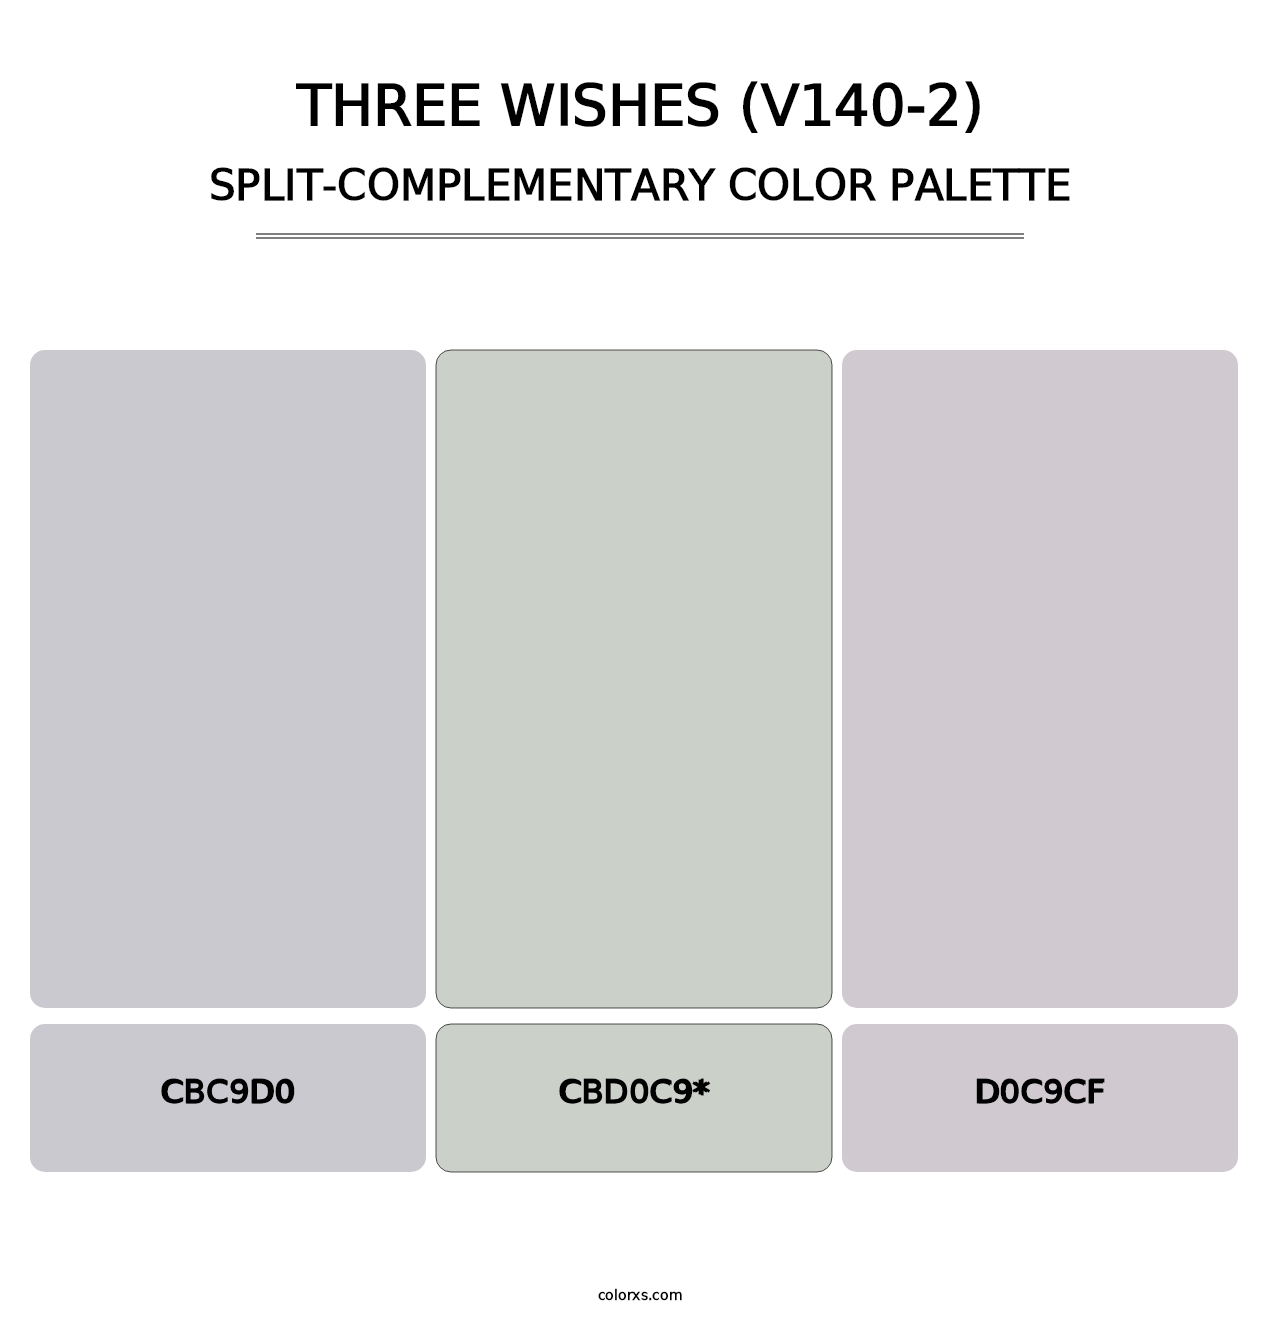 Three Wishes (V140-2) - Split-Complementary Color Palette